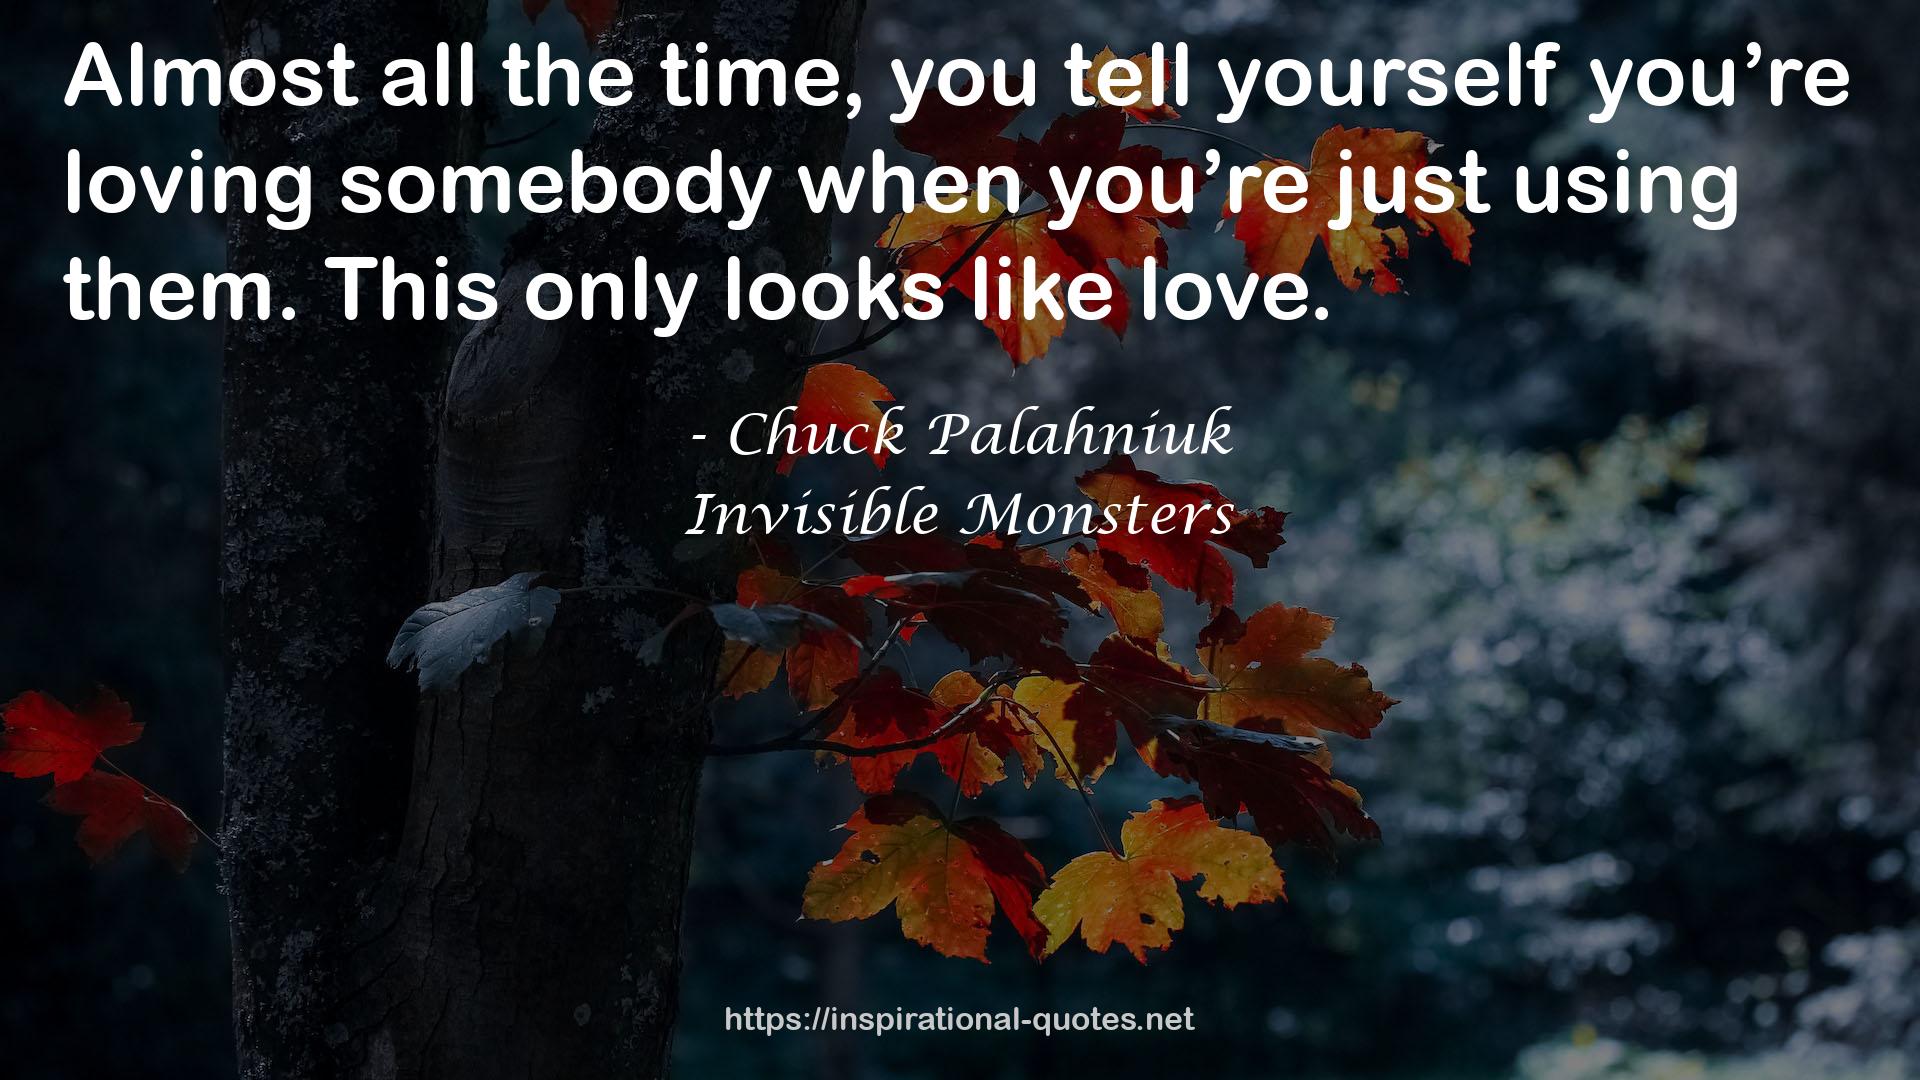 Invisible Monsters QUOTES